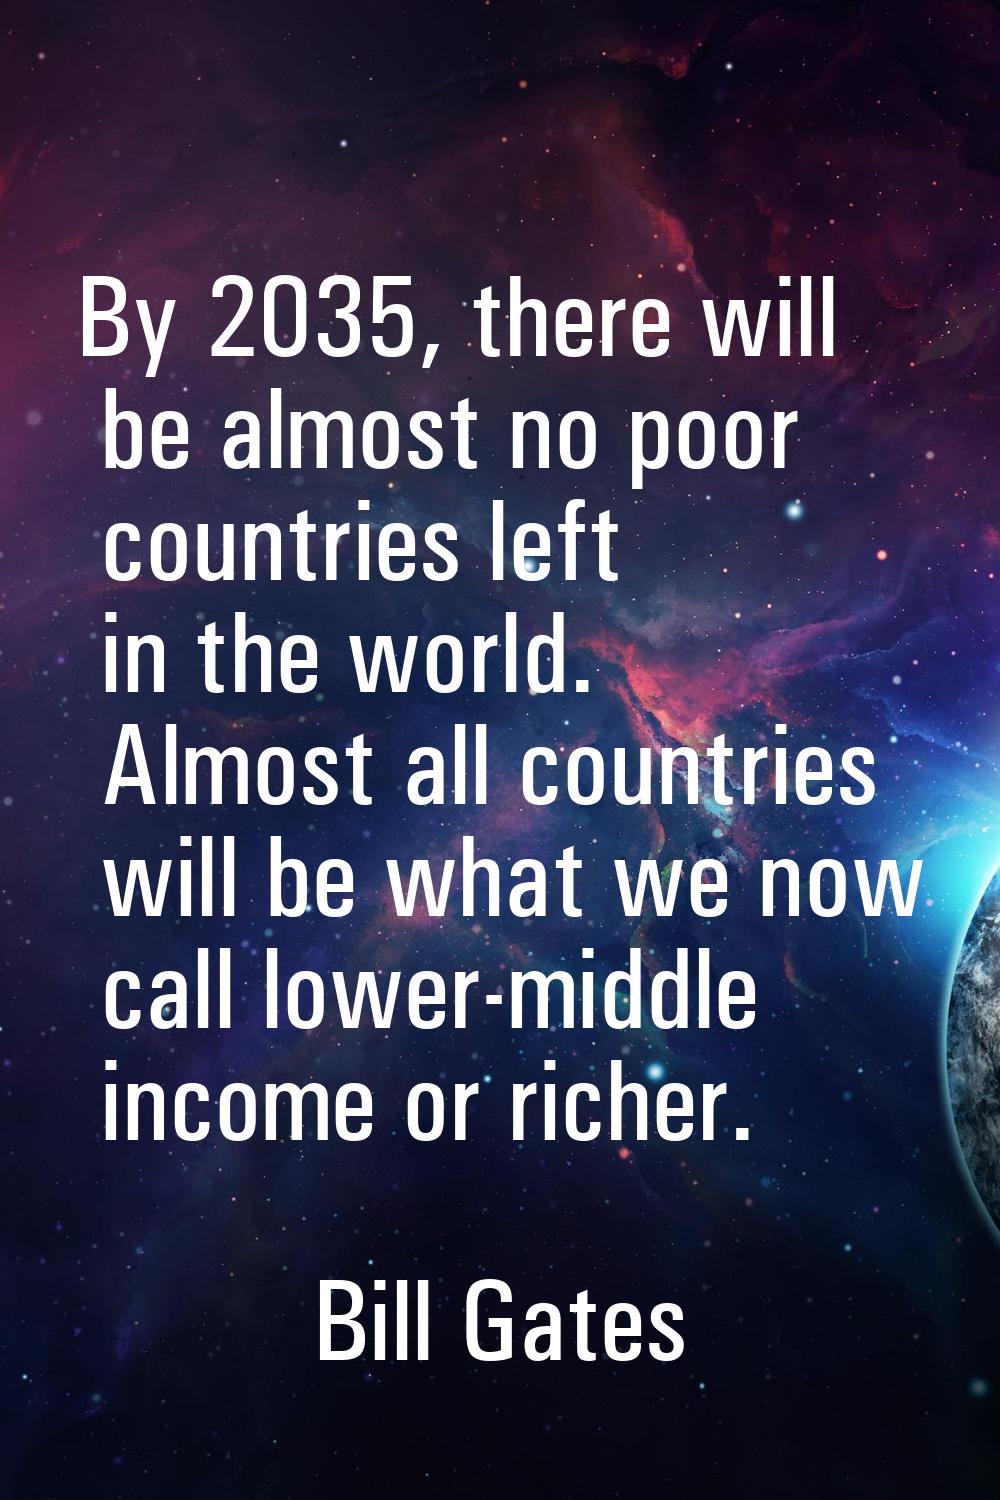 By 2035, there will be almost no poor countries left in the world. Almost all countries will be wha